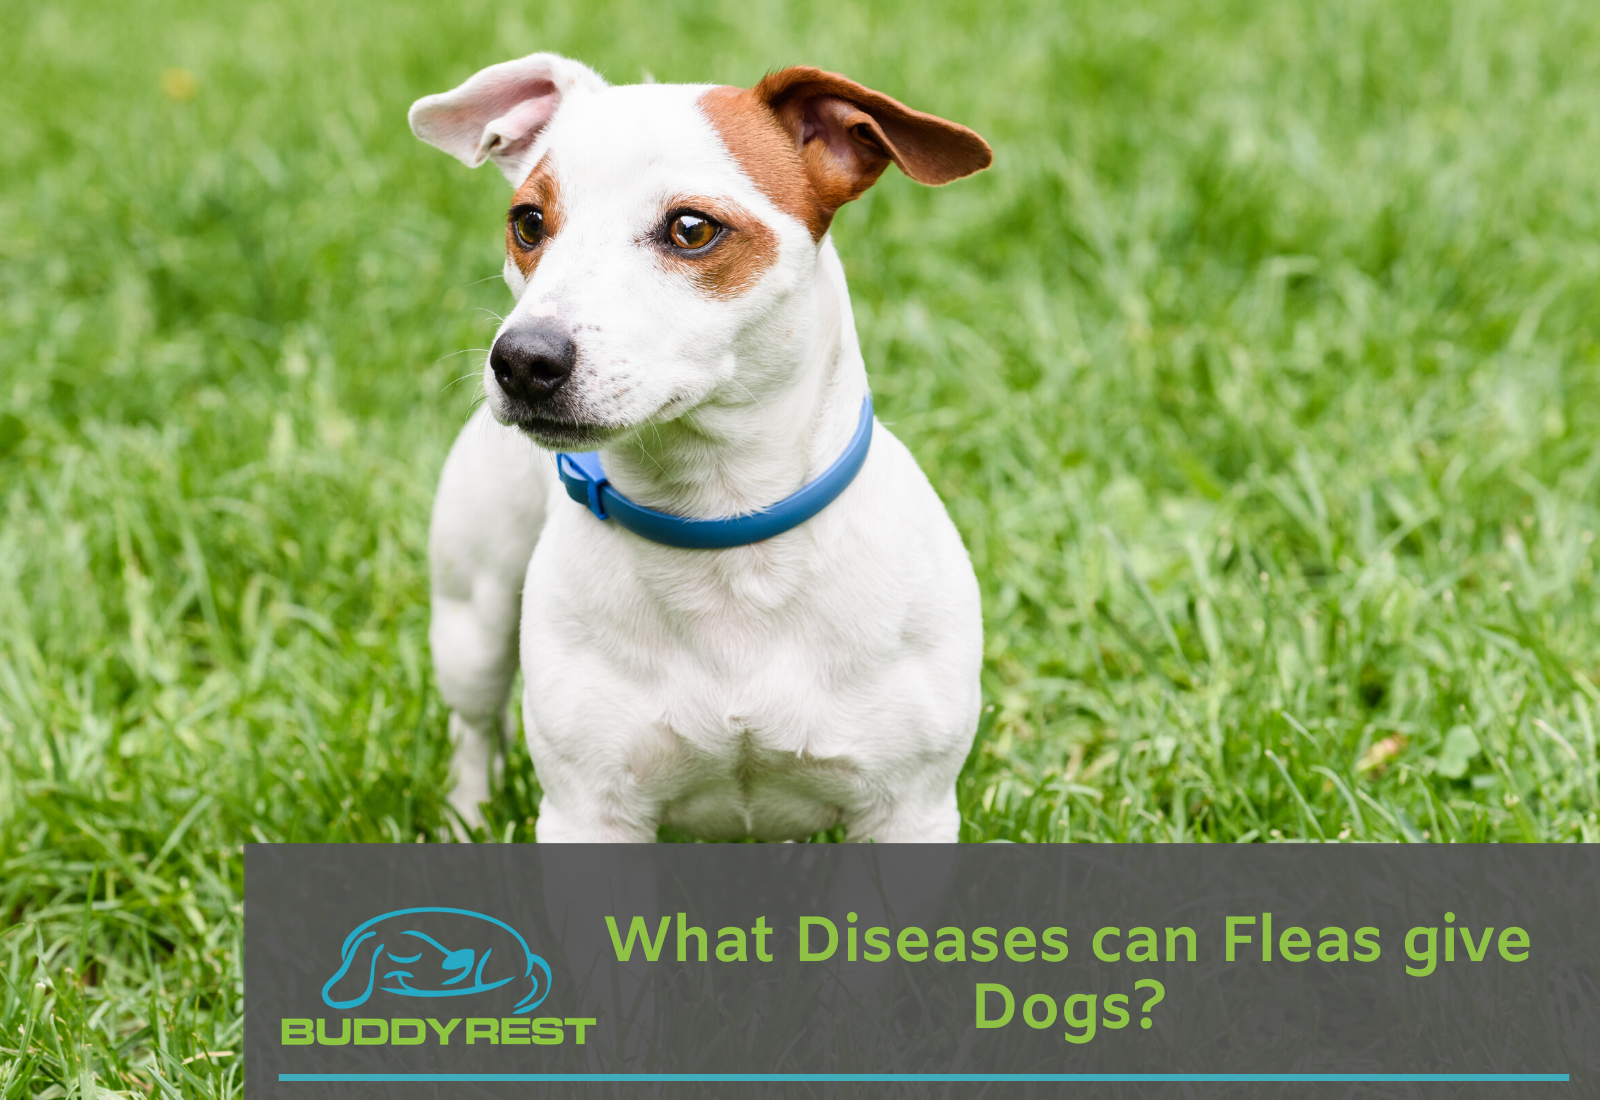 What Diseases can Fleas give Dogs?